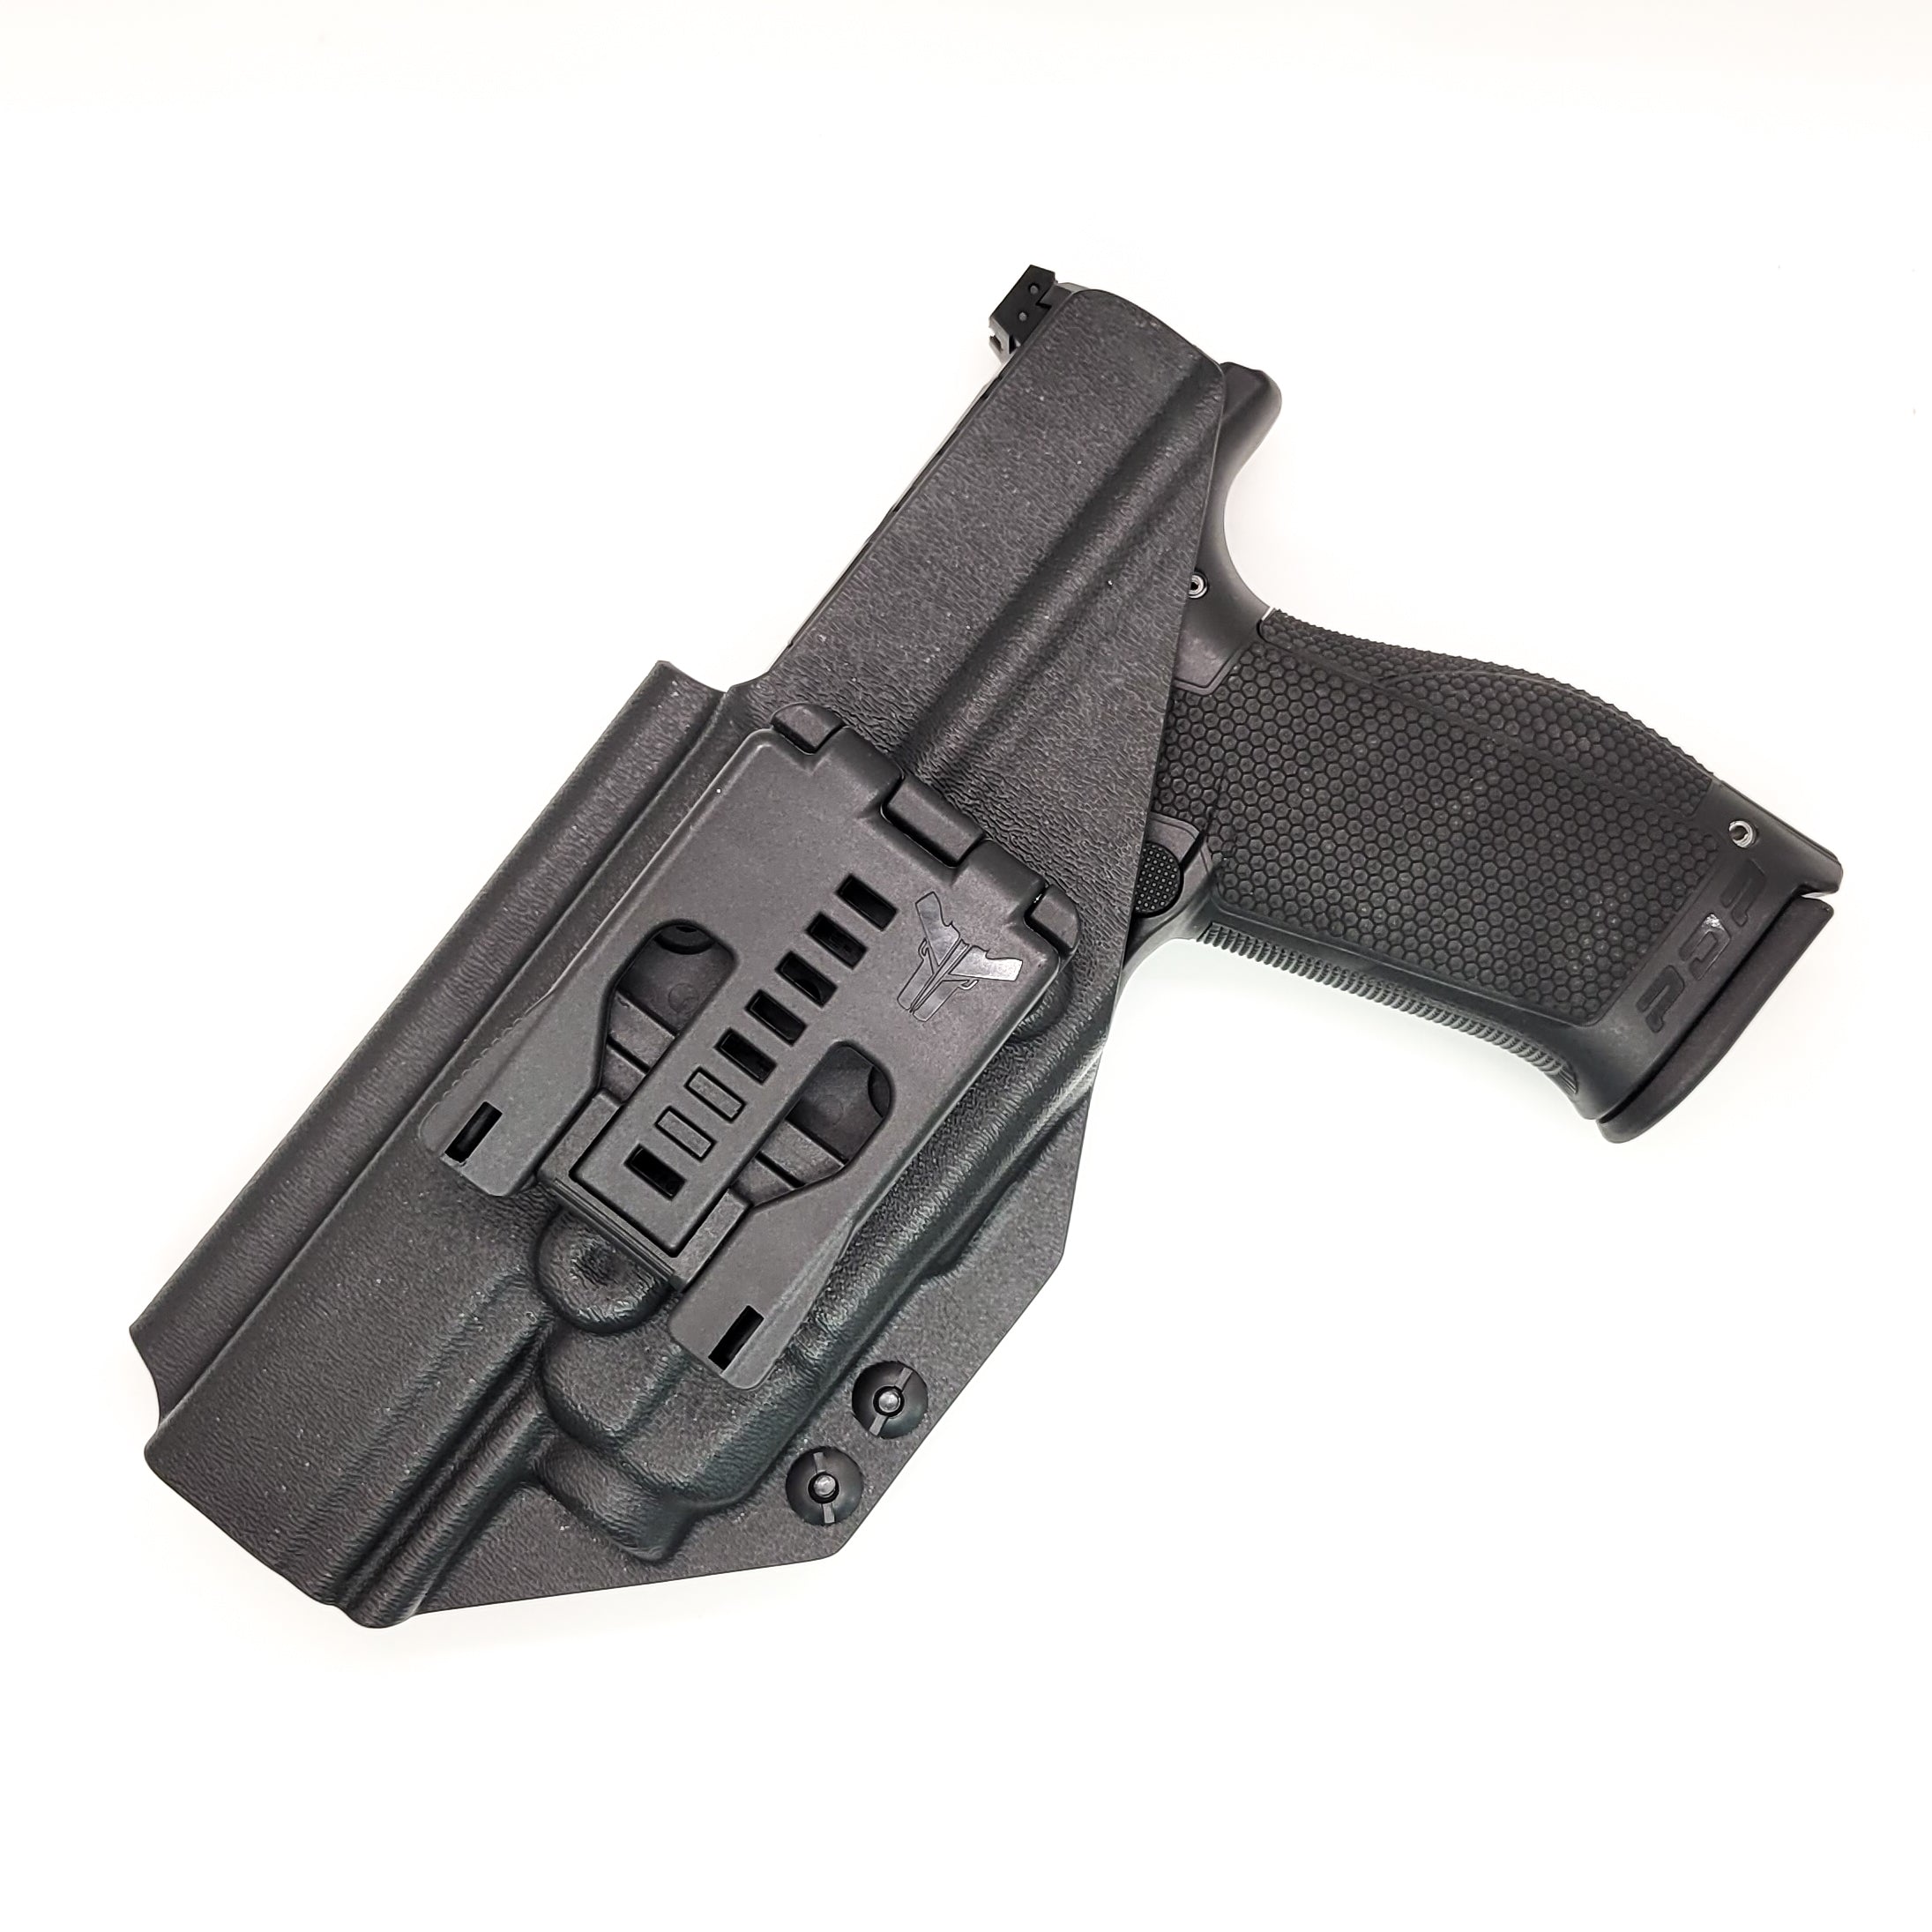 For the best Outside Waistband Taco Style Holster designed to fit the Walther PDP 5" Full-Size pistol with the Streamlight TLR-7A or TLR-7 mounted on the firearm, shop Four Brothers Holsters. Cut for red dot sight, full sweat guard, adjustable retention & open muzzle for threaded barrels & compensators. 